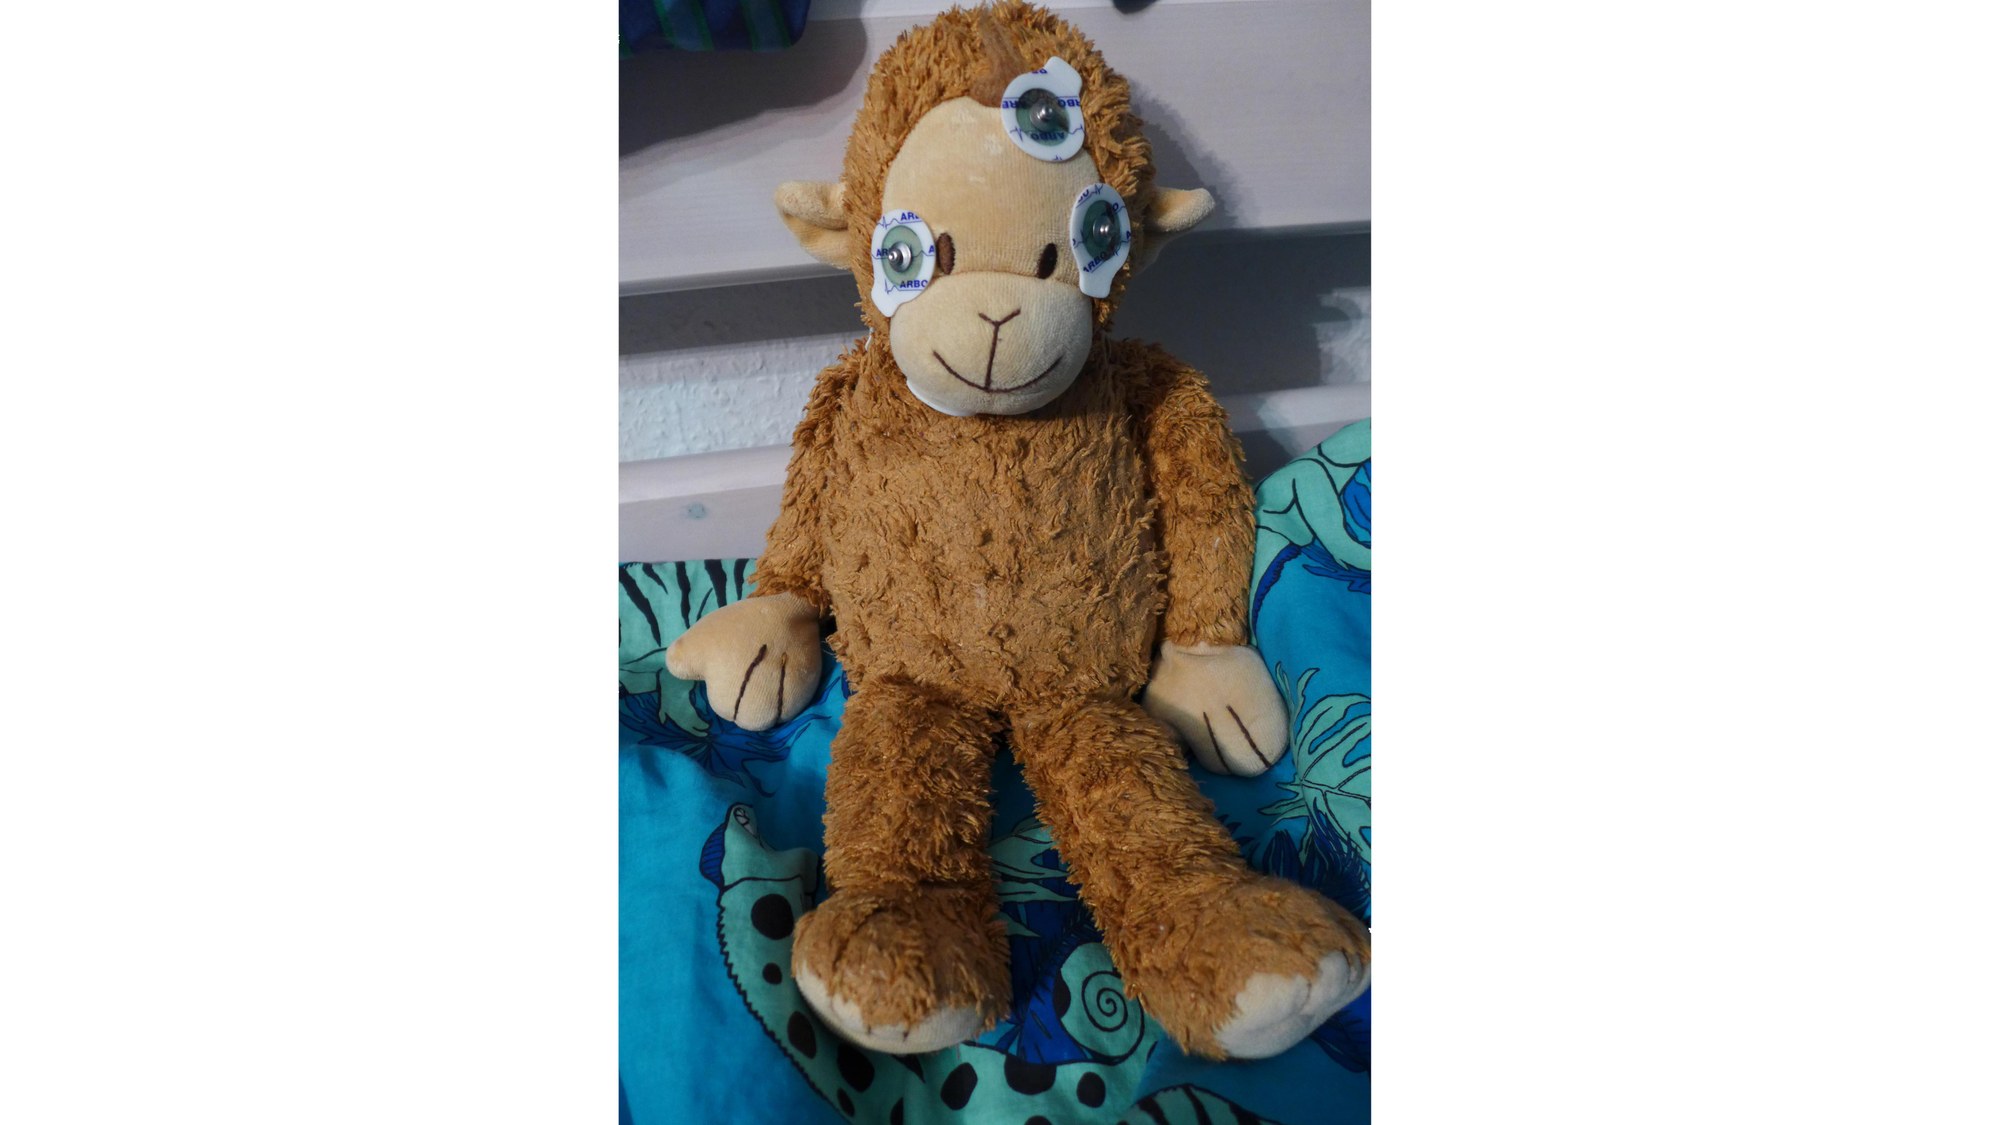 Stuffed animal with electrodes